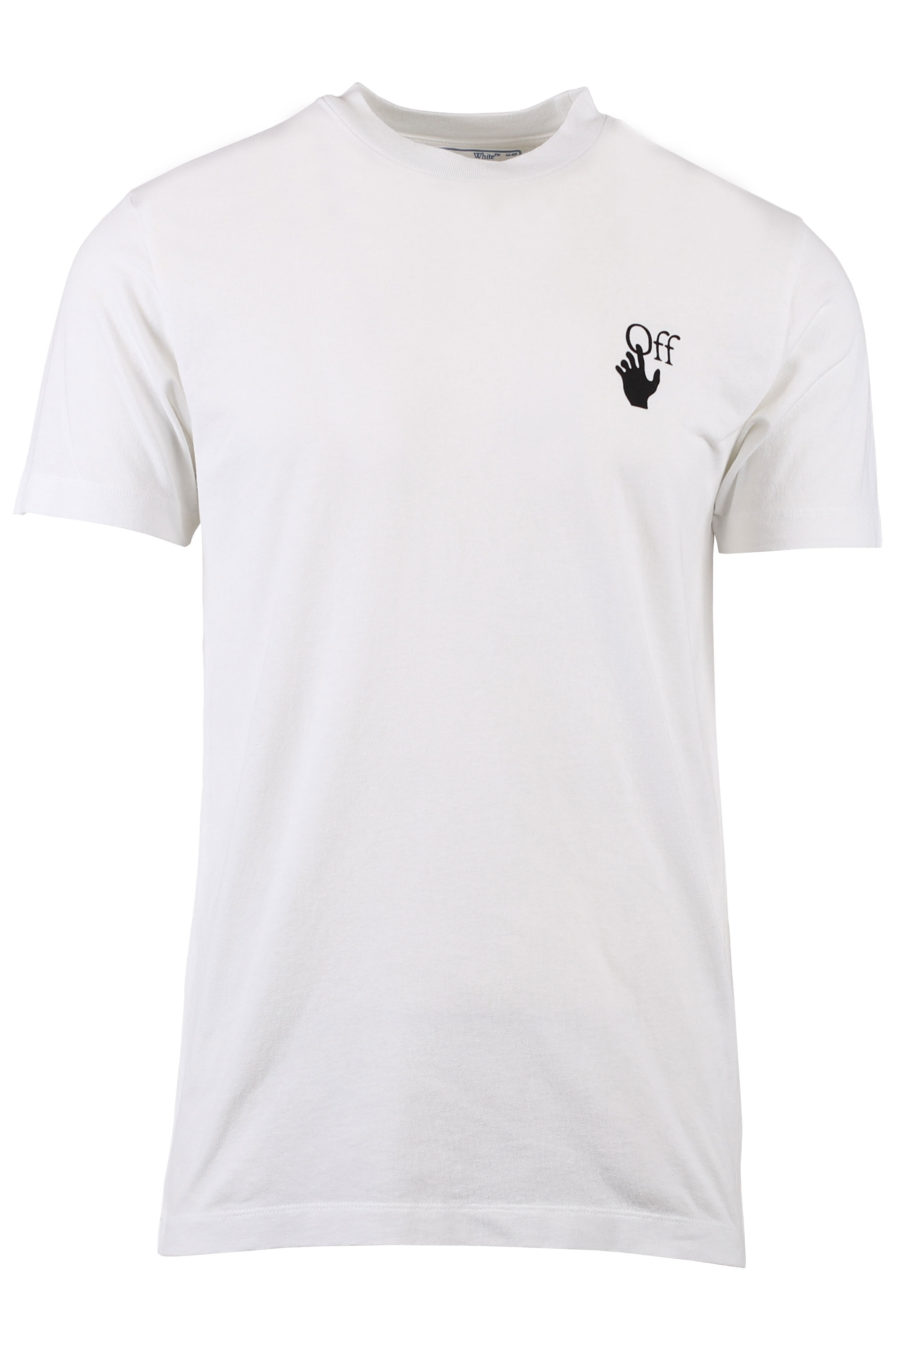 White T-shirt with black arrows in gradient - IMG 1361 m